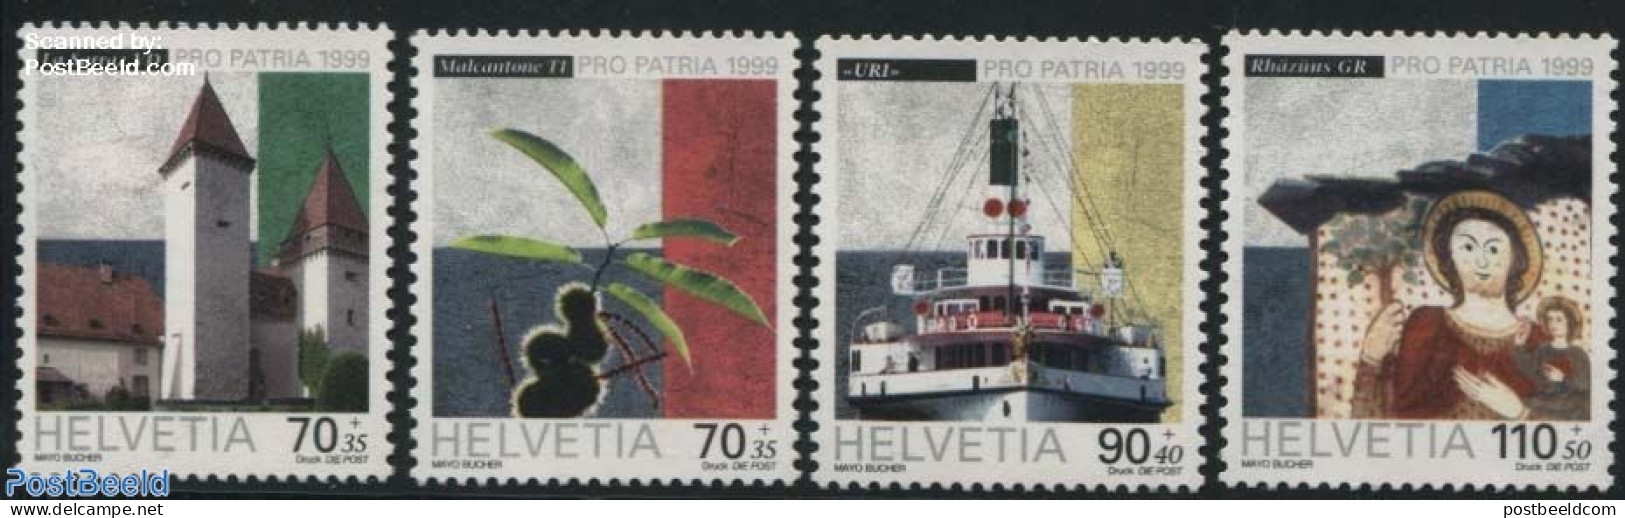 Switzerland 1999 Pro Patria 4v, Mint NH, Transport - Ships And Boats - Art - Castles & Fortifications - Nuovi